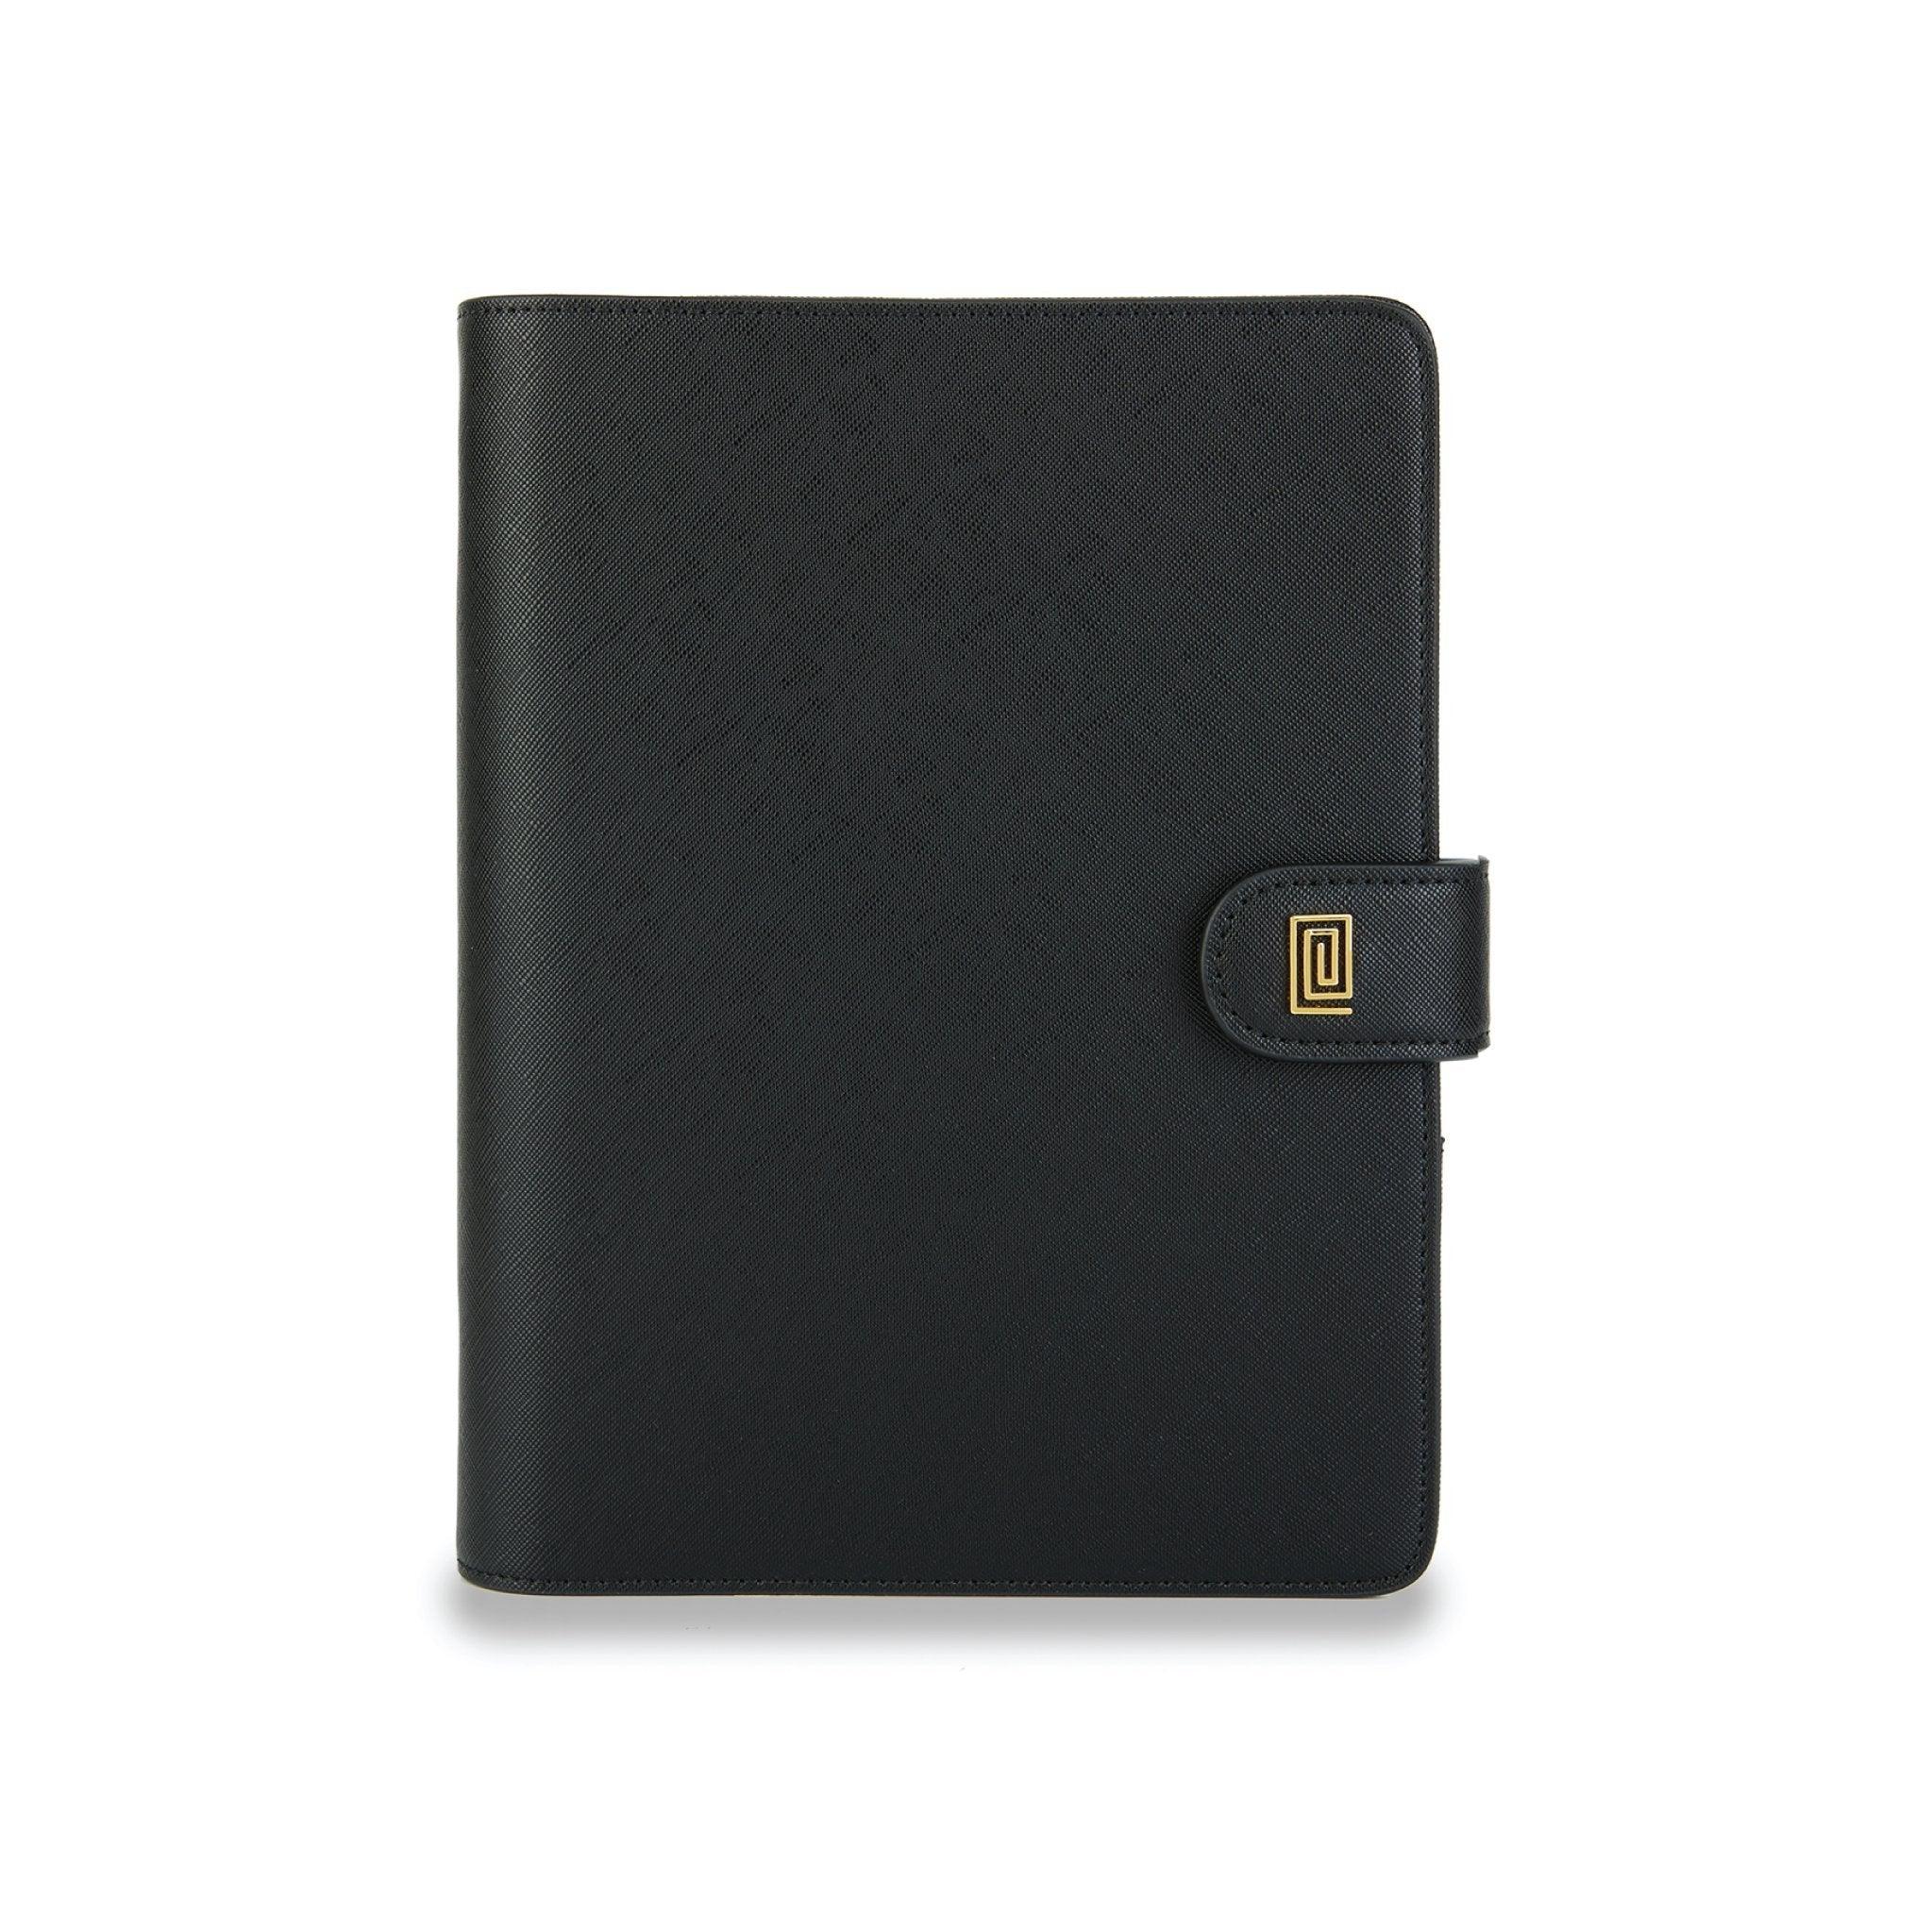 Gold on Jet Black Saffiano Demi Ring | OUTLET | MM3. Demi Ring Agenda | A5 Planner Cover | Final Sale | NOTIQ